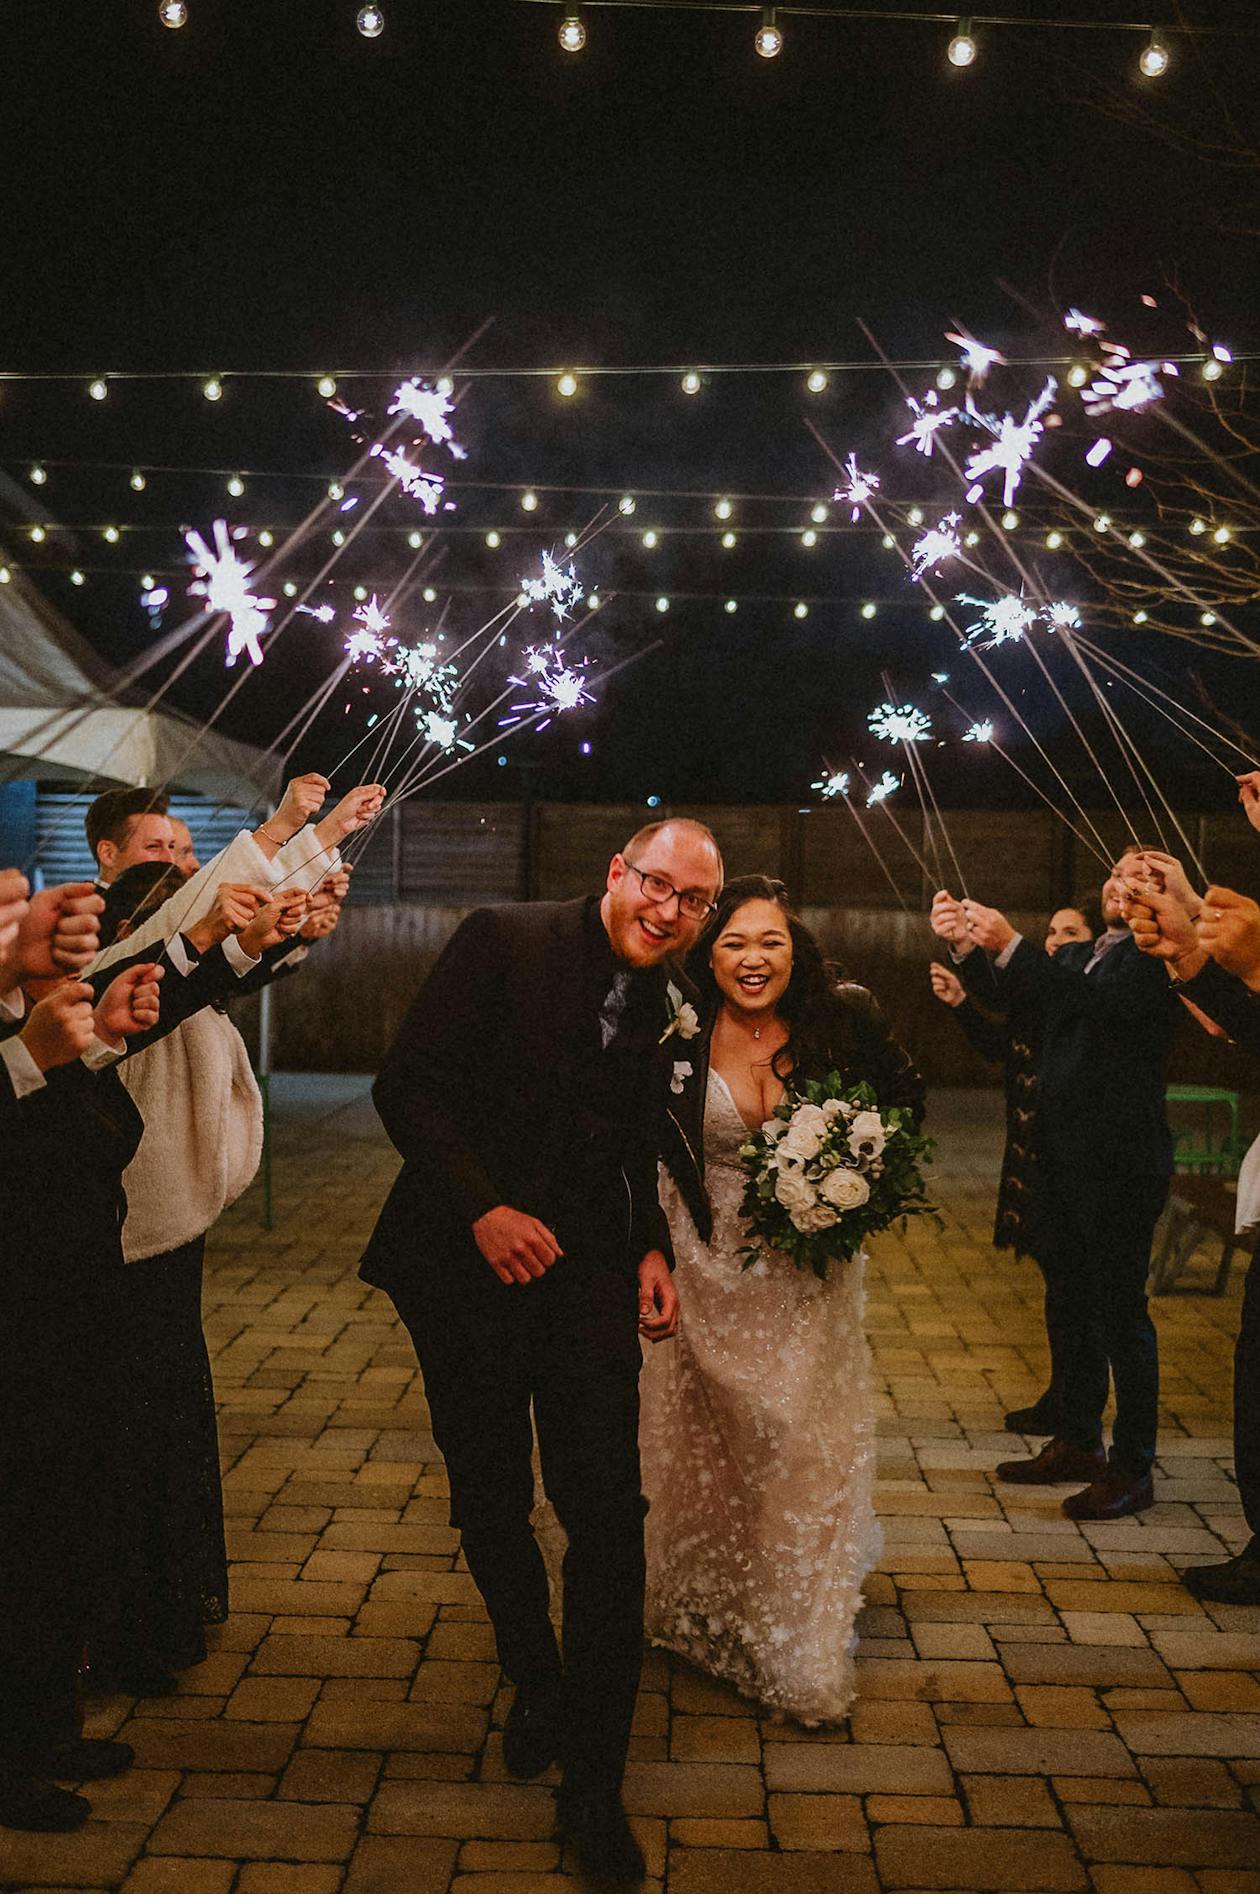 Industrial Micro Wedding at Warehouse 109 in Plainfield, Illinois With Sparkler Wedding Exit | PartySlate